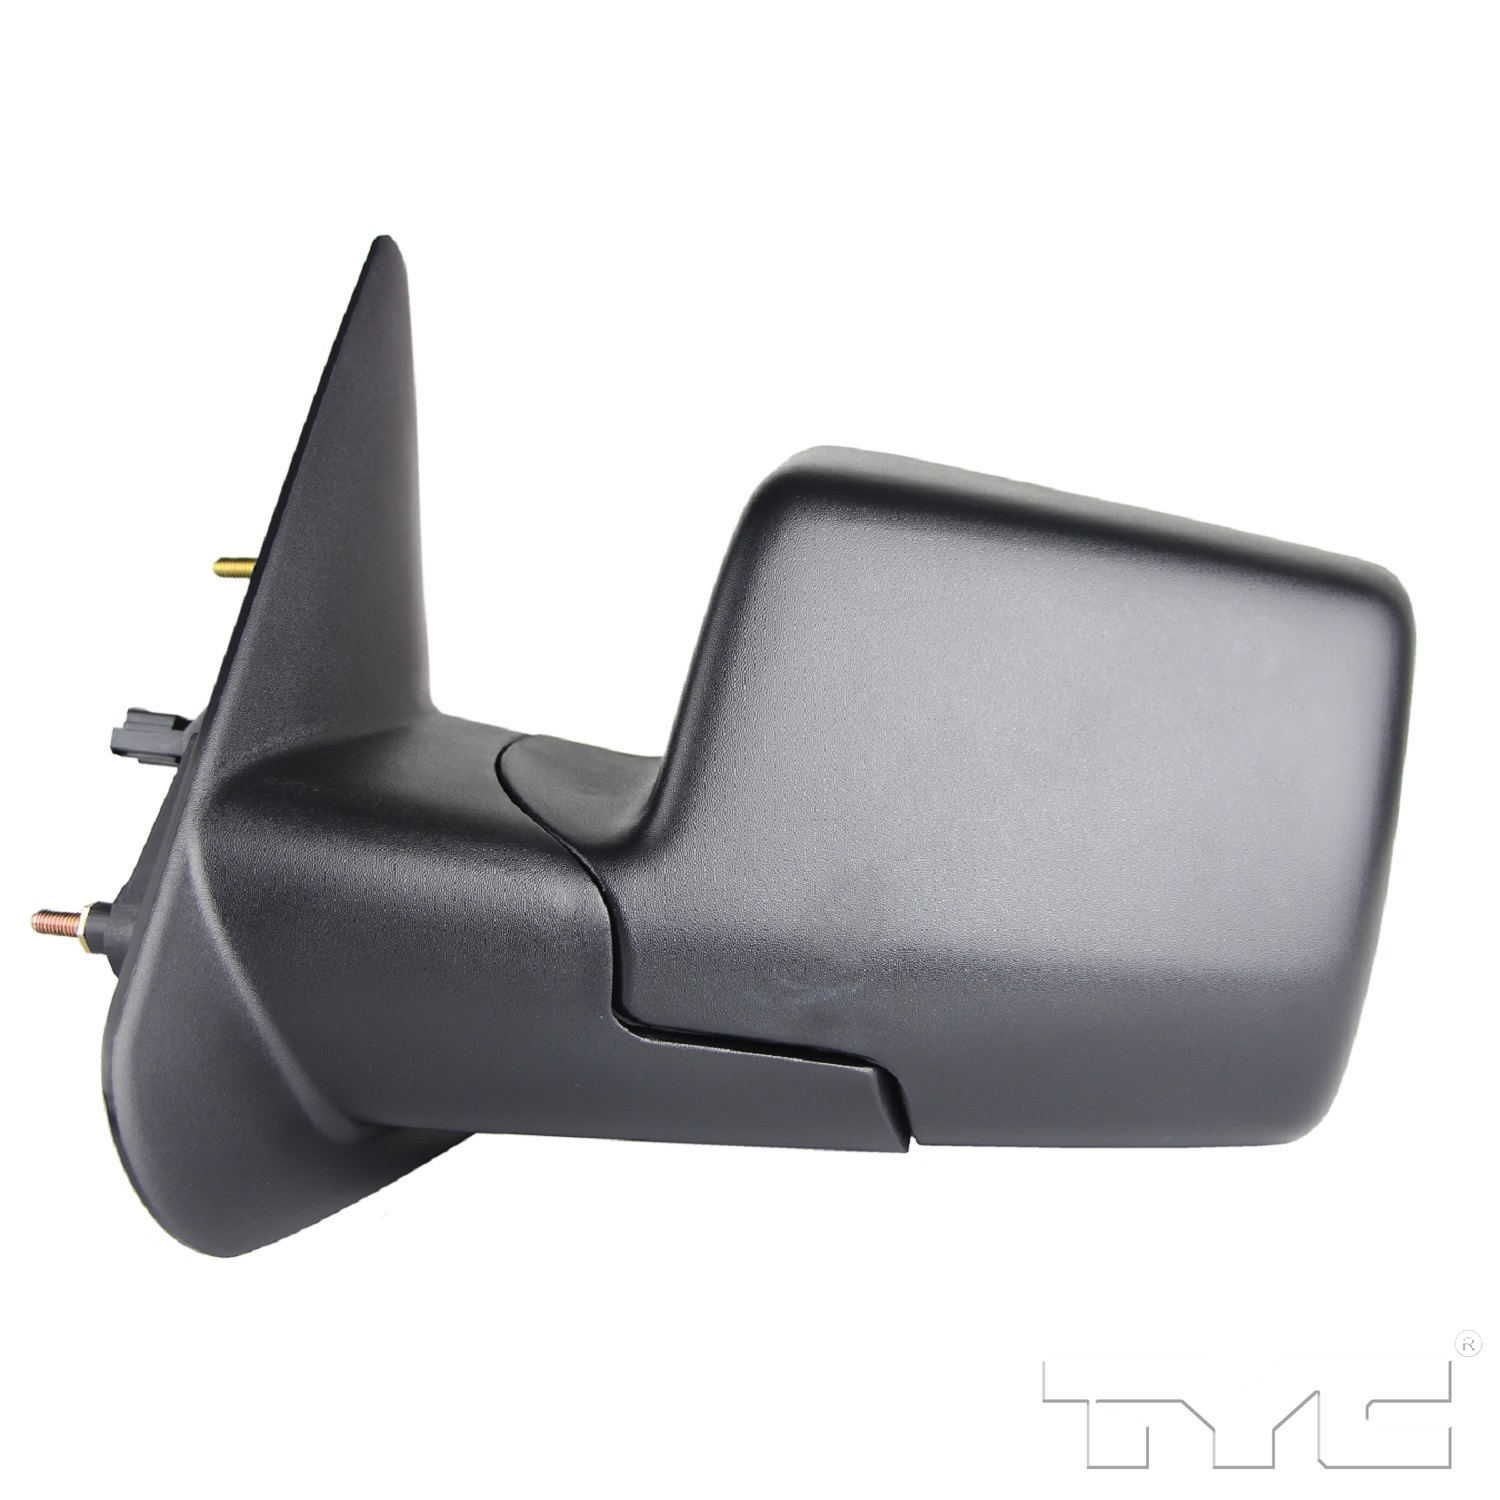 Aftermarket MIRRORS for MAZDA - B4000, B4000,06-07,LT Mirror outside rear view